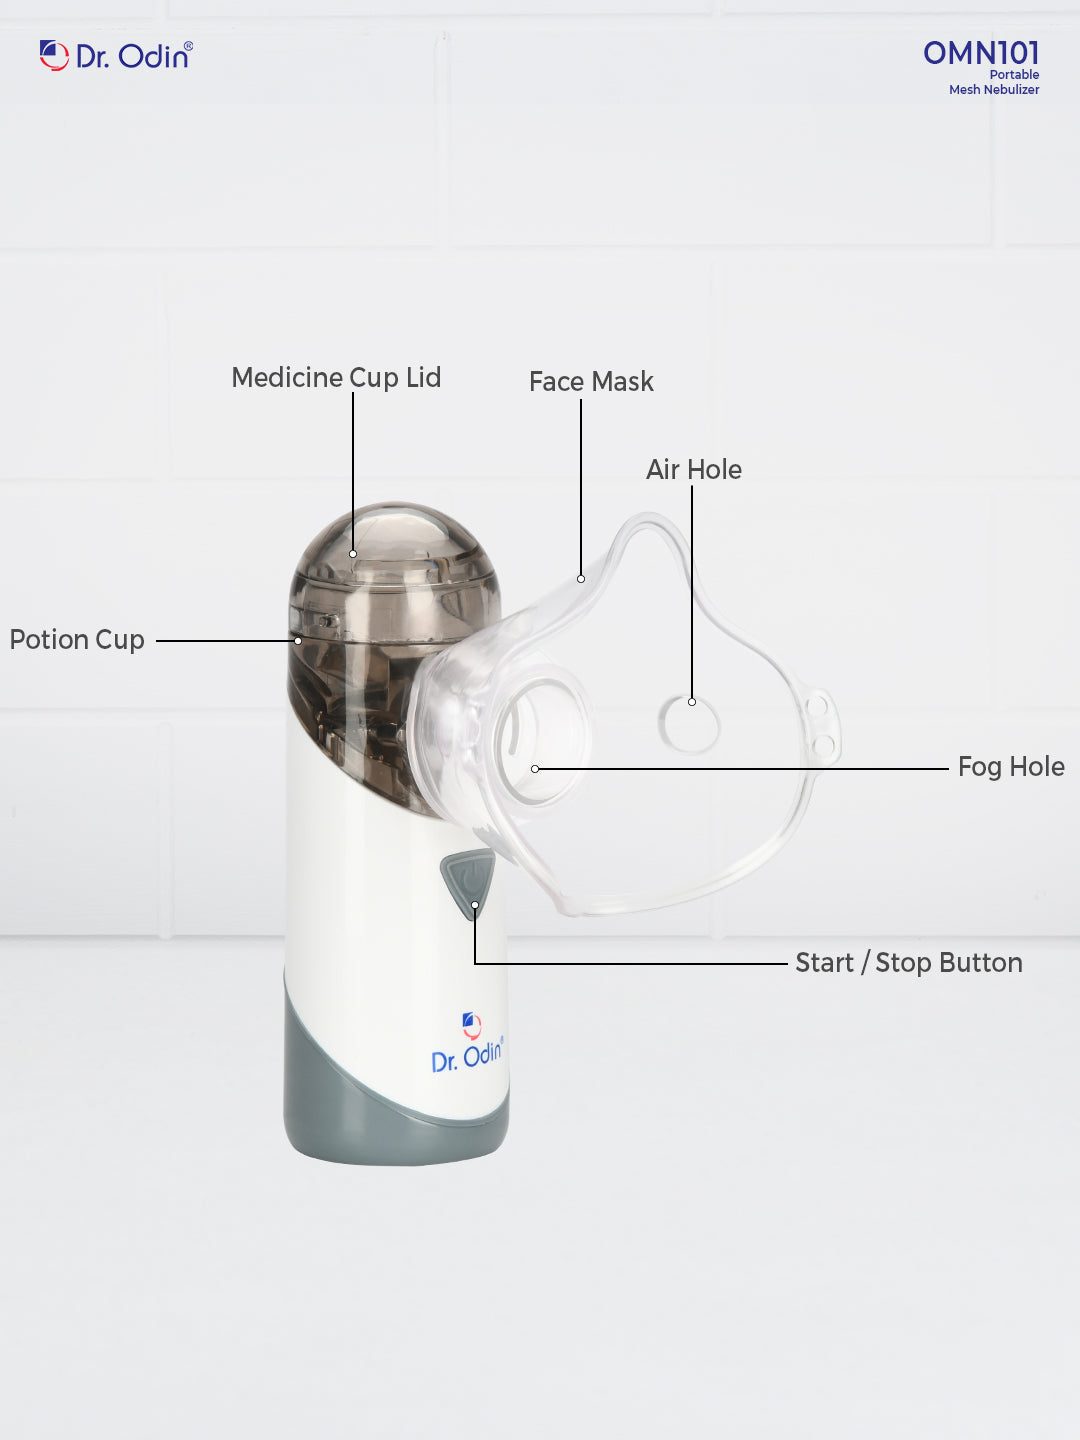 Portable & Rechargeable Mesh Nebulizer OMN101